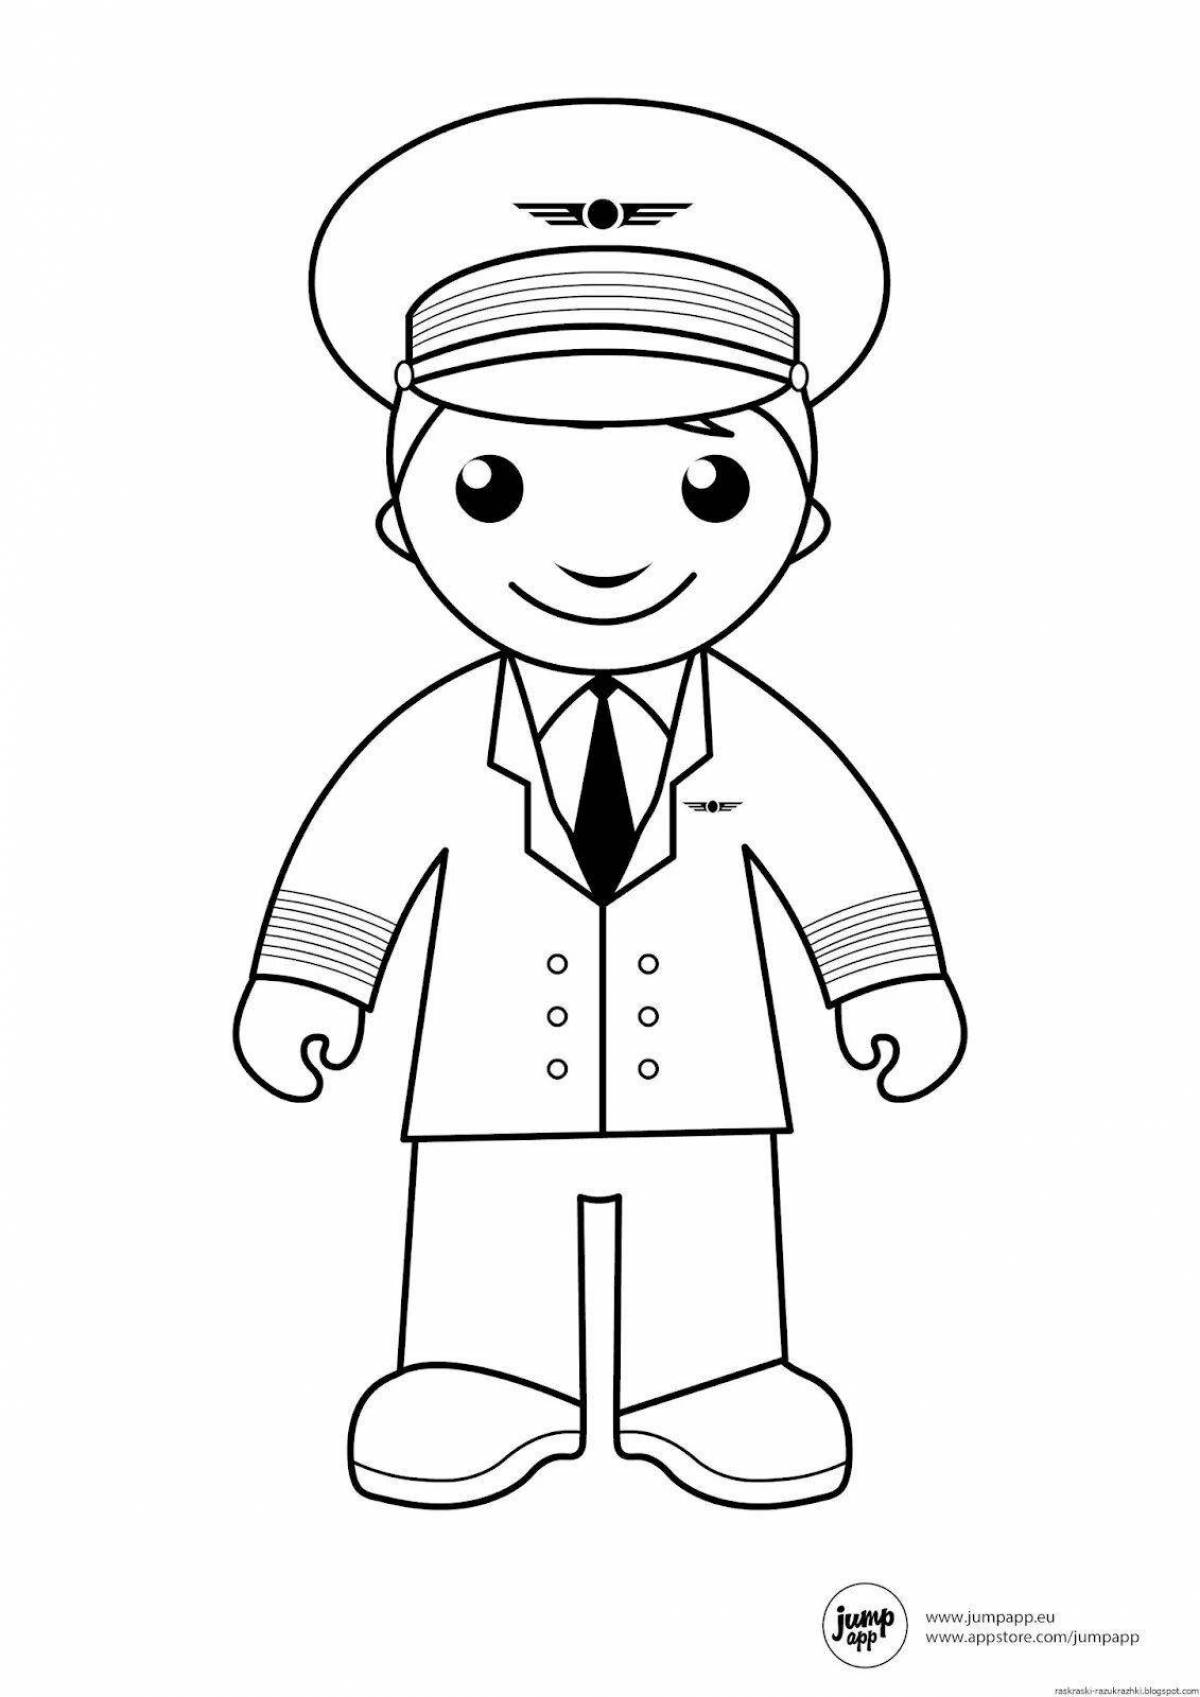 A fun coloring book about the military profession for preschoolers